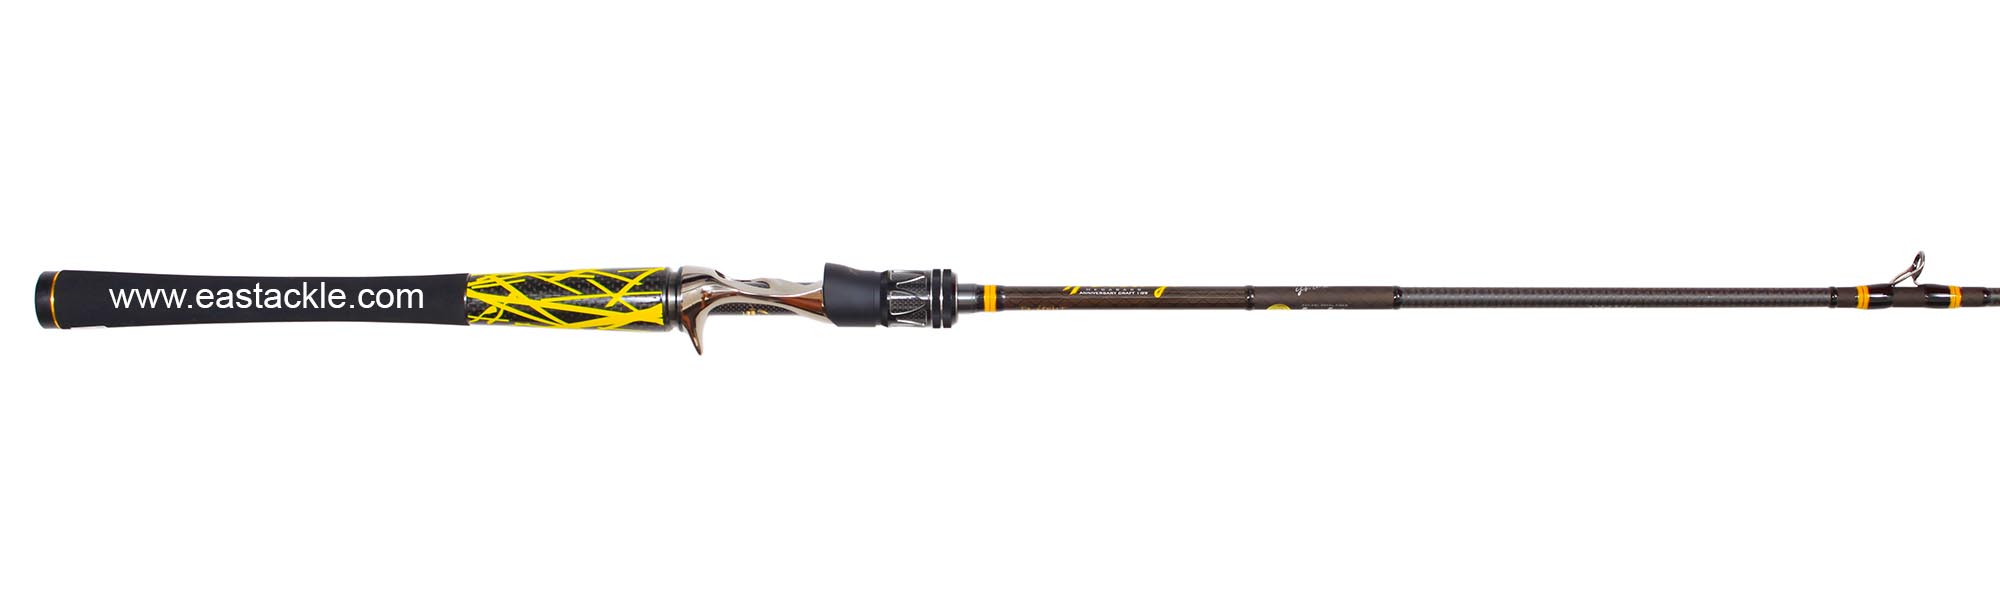 Megabass - Heritage F4-68XHT - Bait Casting Rod - Butt to Stripper Guide (Side View) | Eastackle